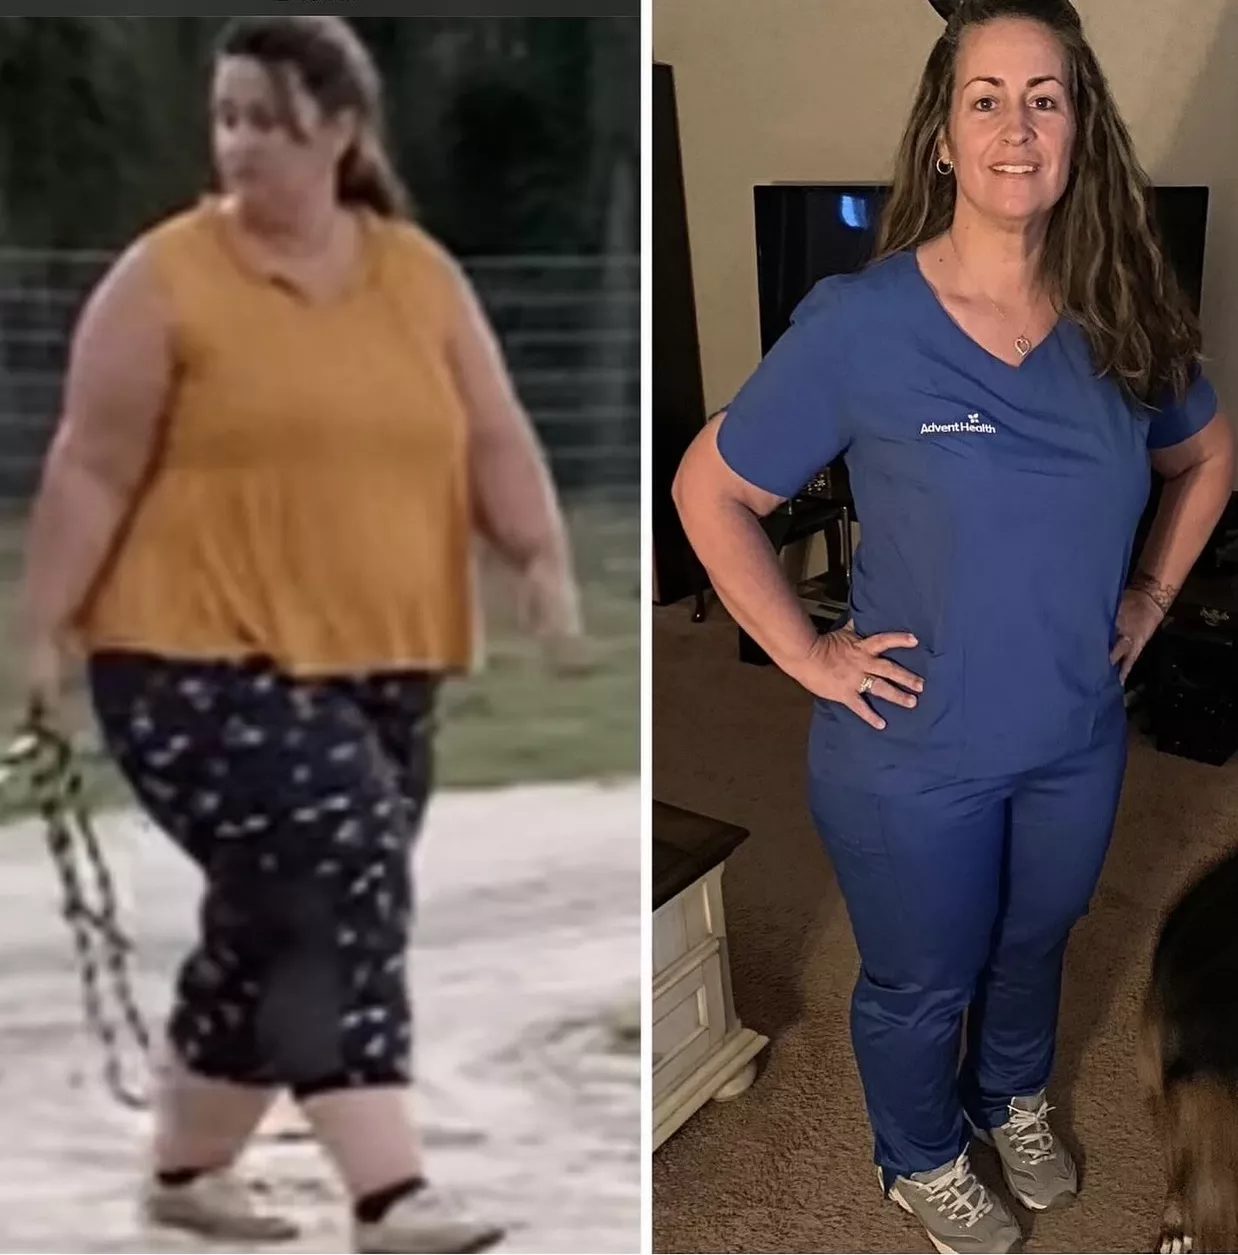 When Cianciotto felt limited by weight gain, she underwent bariatric surgery with the support of her AdventHealth team, which enabled her to return to the sport she loves.